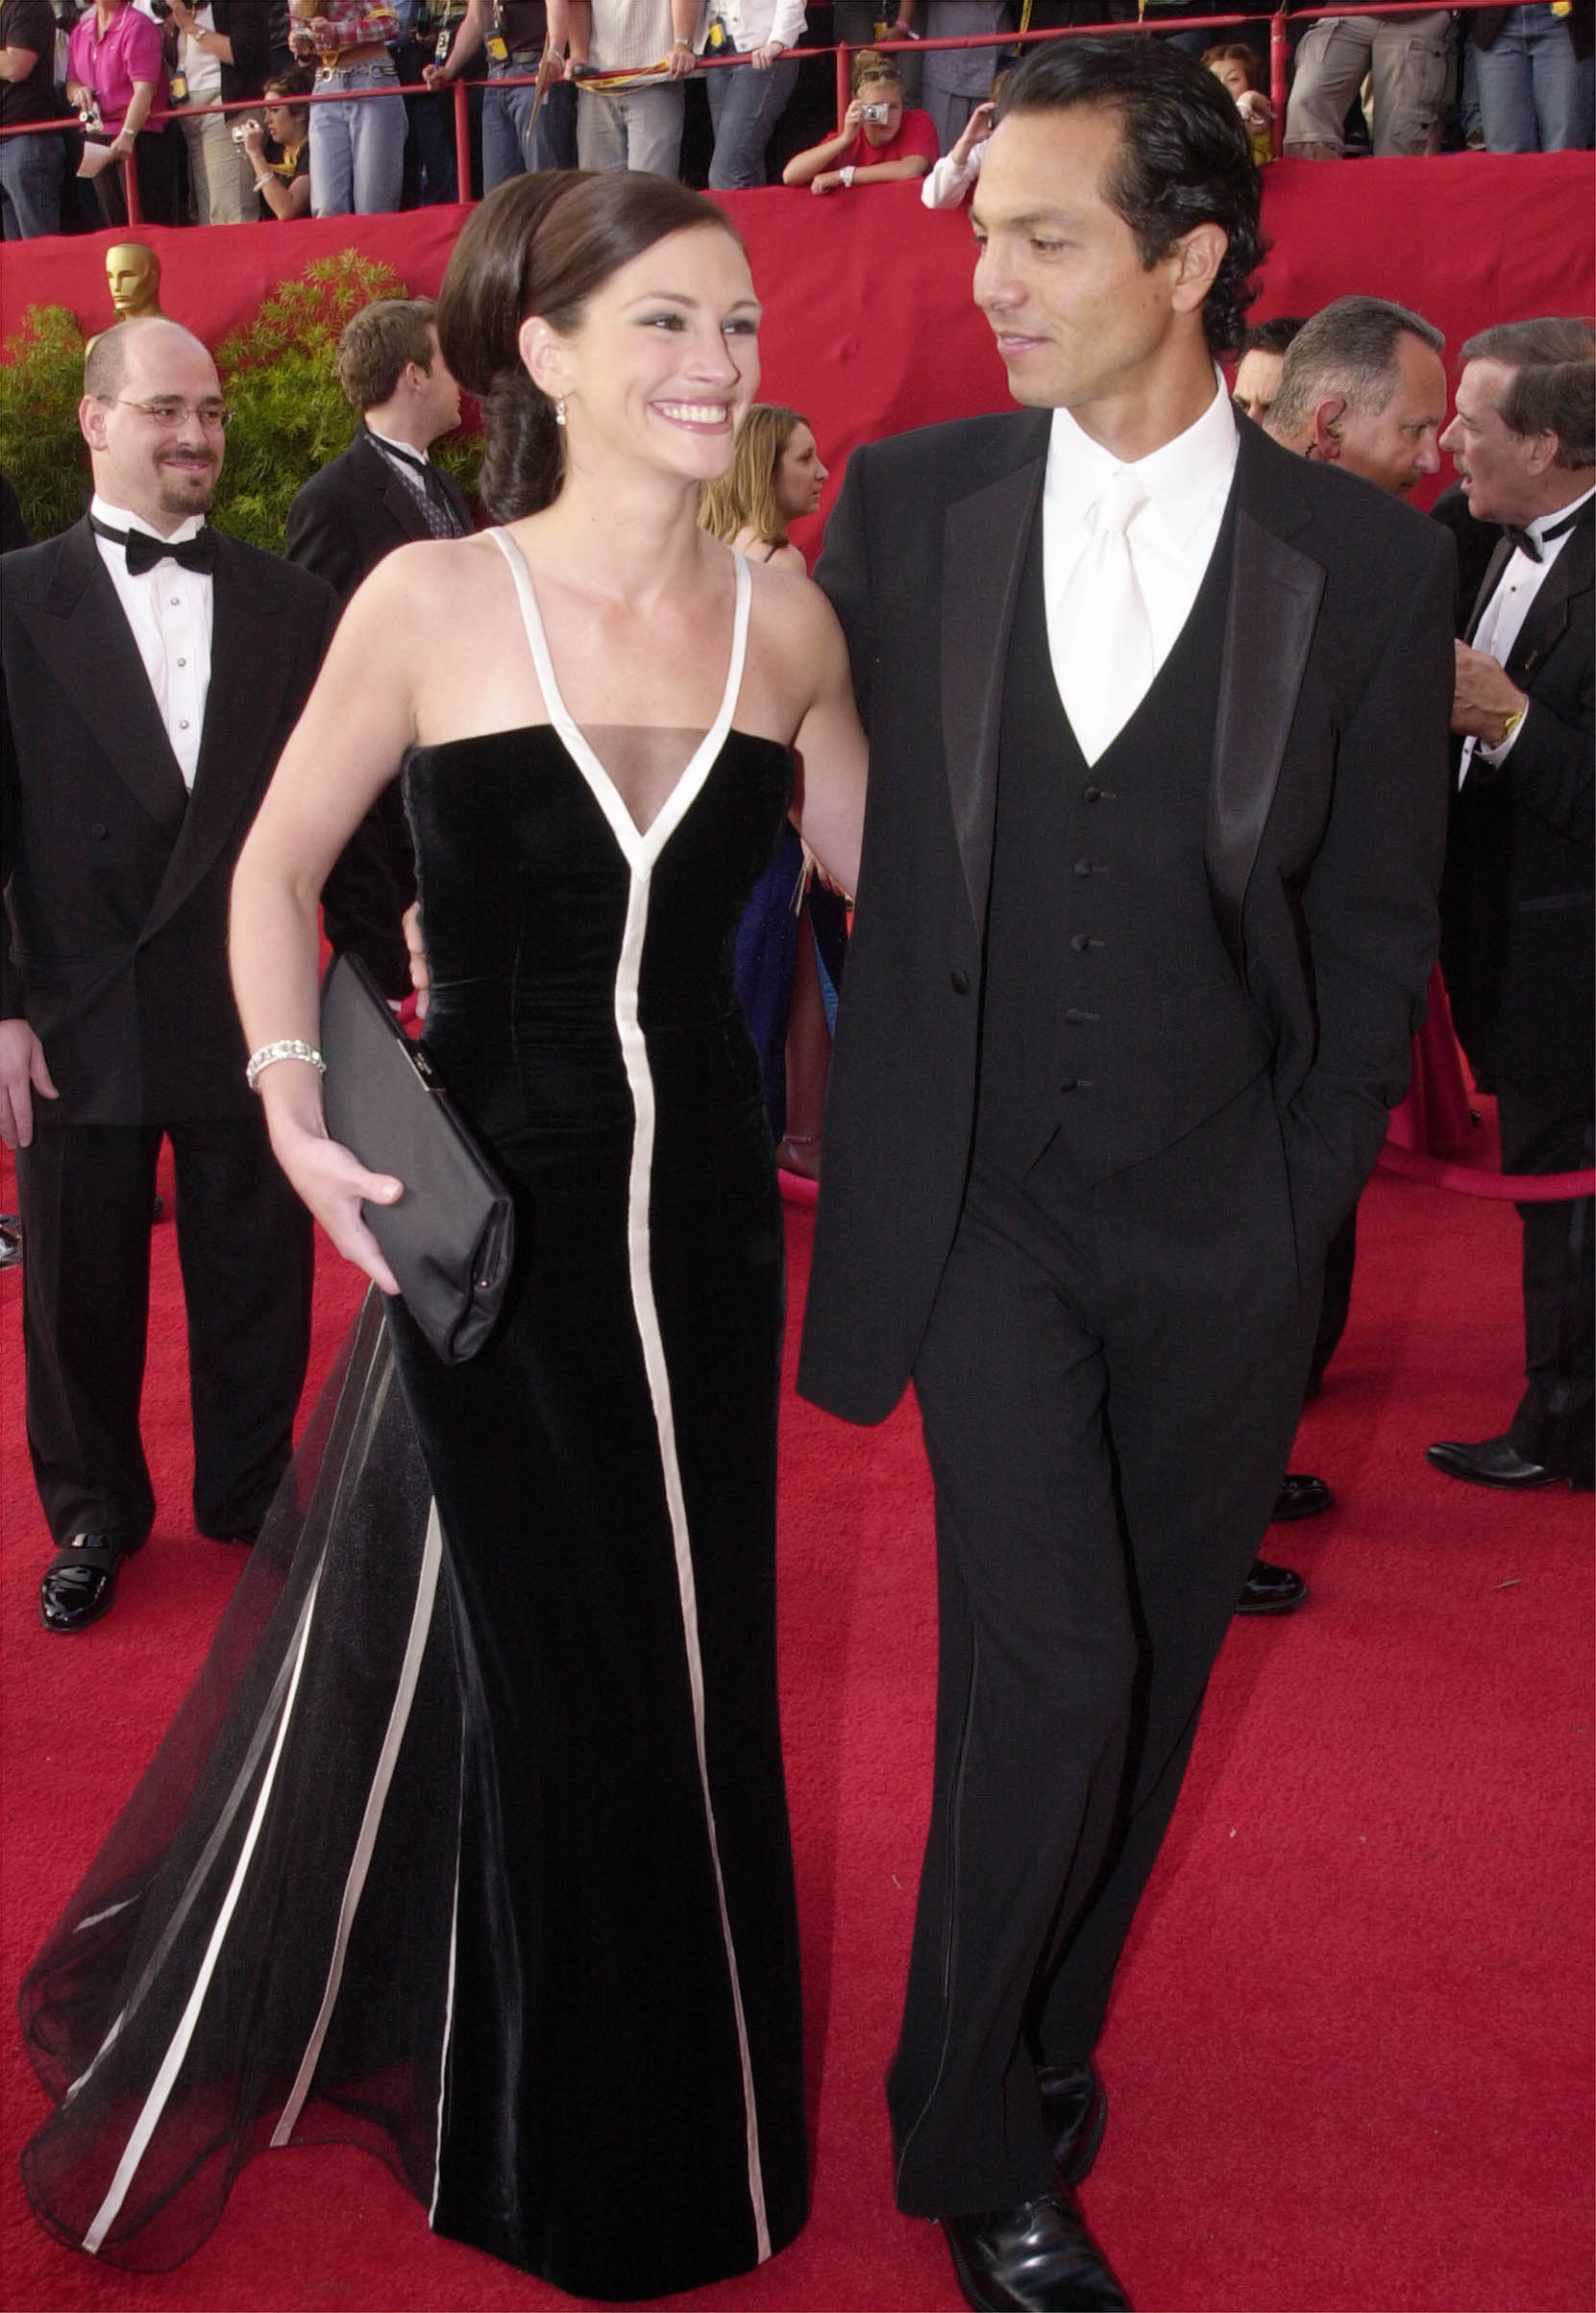 386900 228: Actress Julia Roberts, who won an Oscar for Best Actress, and her boyfriend Benjamin Bratt arrive for the 73rd Annual Academy Awards March 25, 2001 at the Shrine Auditorium in Los Angeles. Bratt is wearing an Armani Suit and Roberts is wearing a vintage Valentino dress from 1982 with Van Cleef and Arpels jewelry. Her hair is by Serge Normant of the Jed Root Agency and her makeup is by Genivive Herr. (Photo by Getty Images